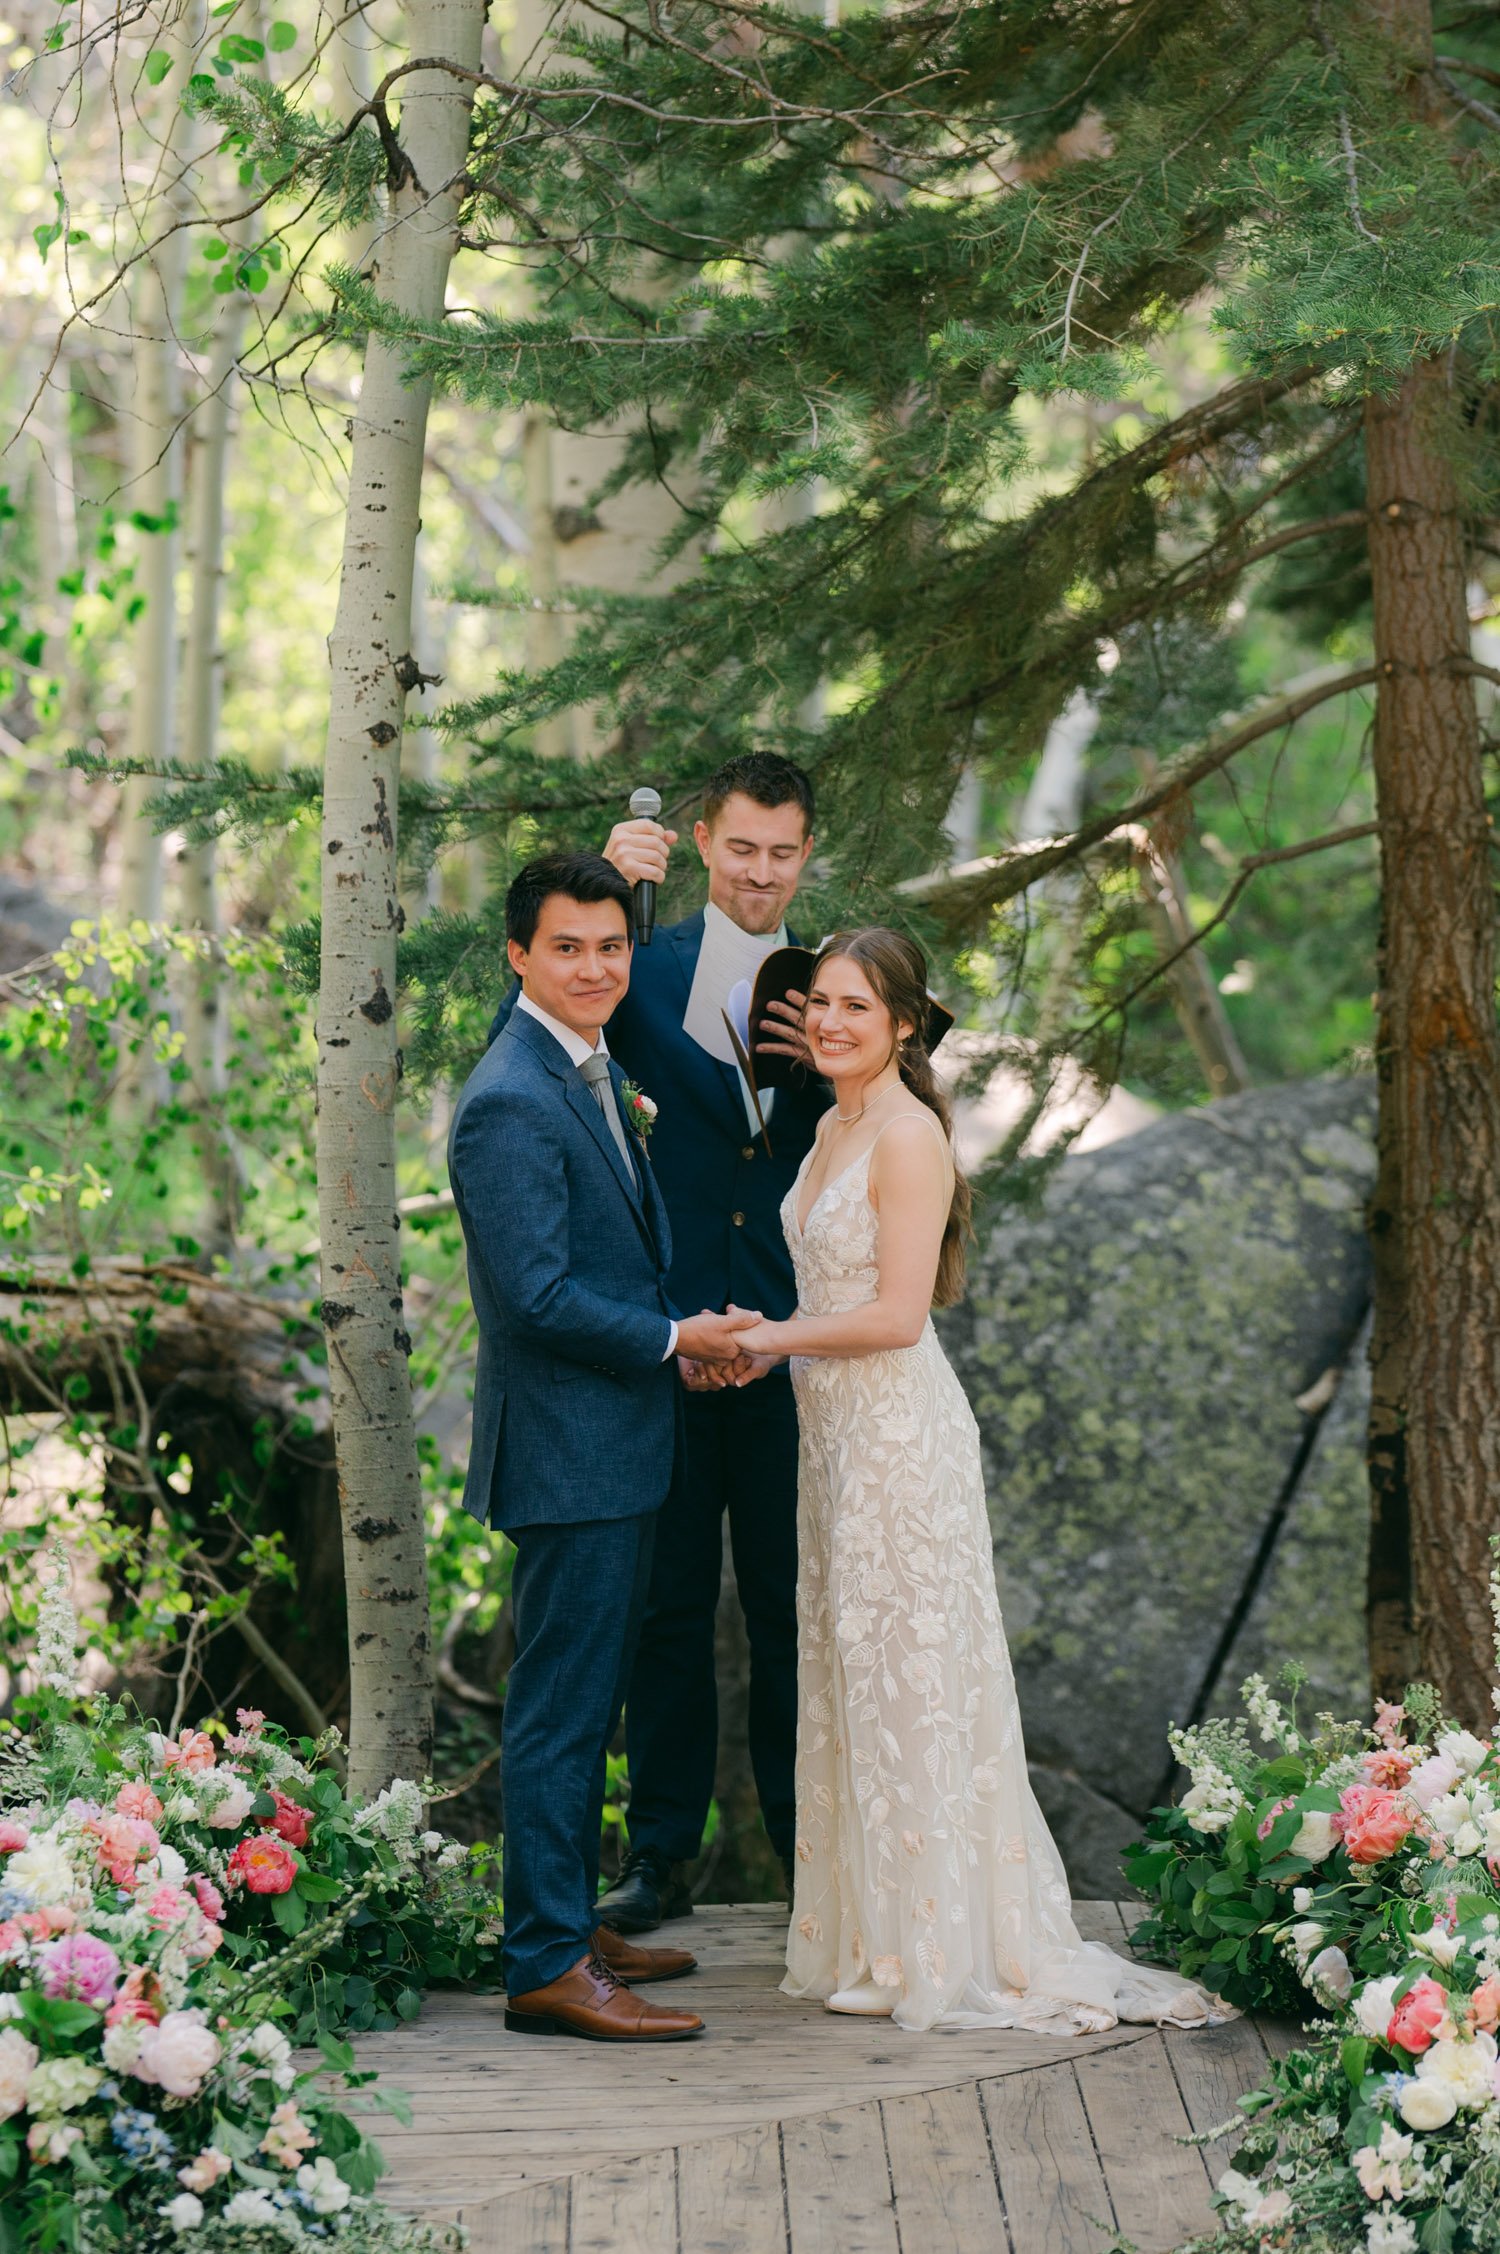 Desolation wilderness hotel wedding, photo of a couple during their wedding ceremony, holding hands, surrounded by flowers in the forest